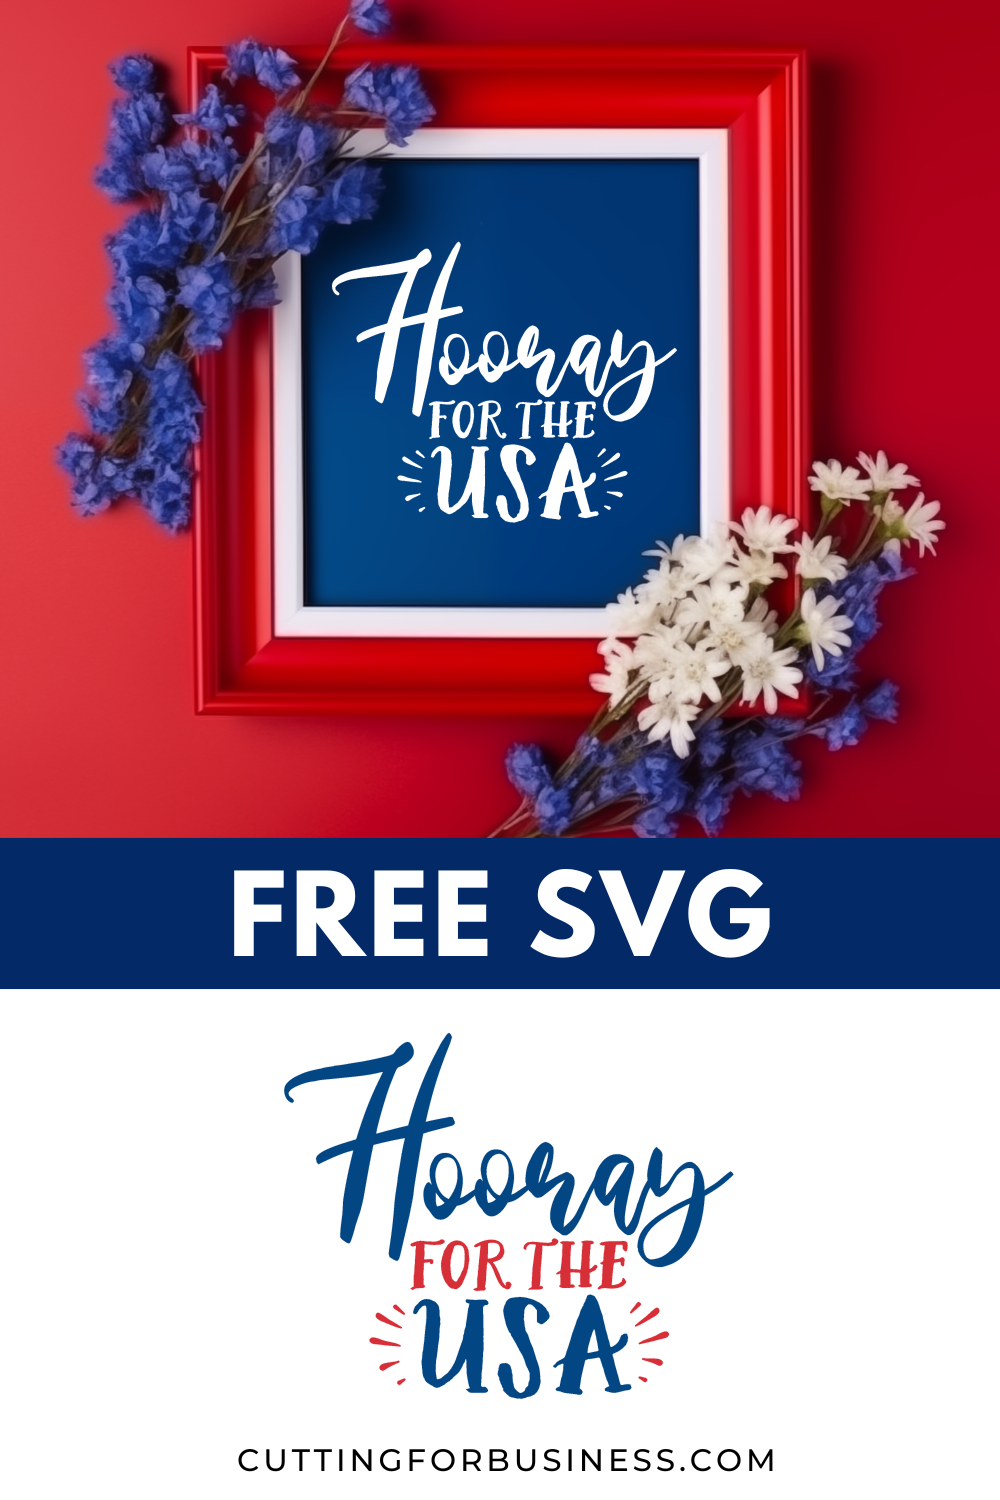 Free July 4 SVG - Hooray for the USA - cuttingforbusiness.com